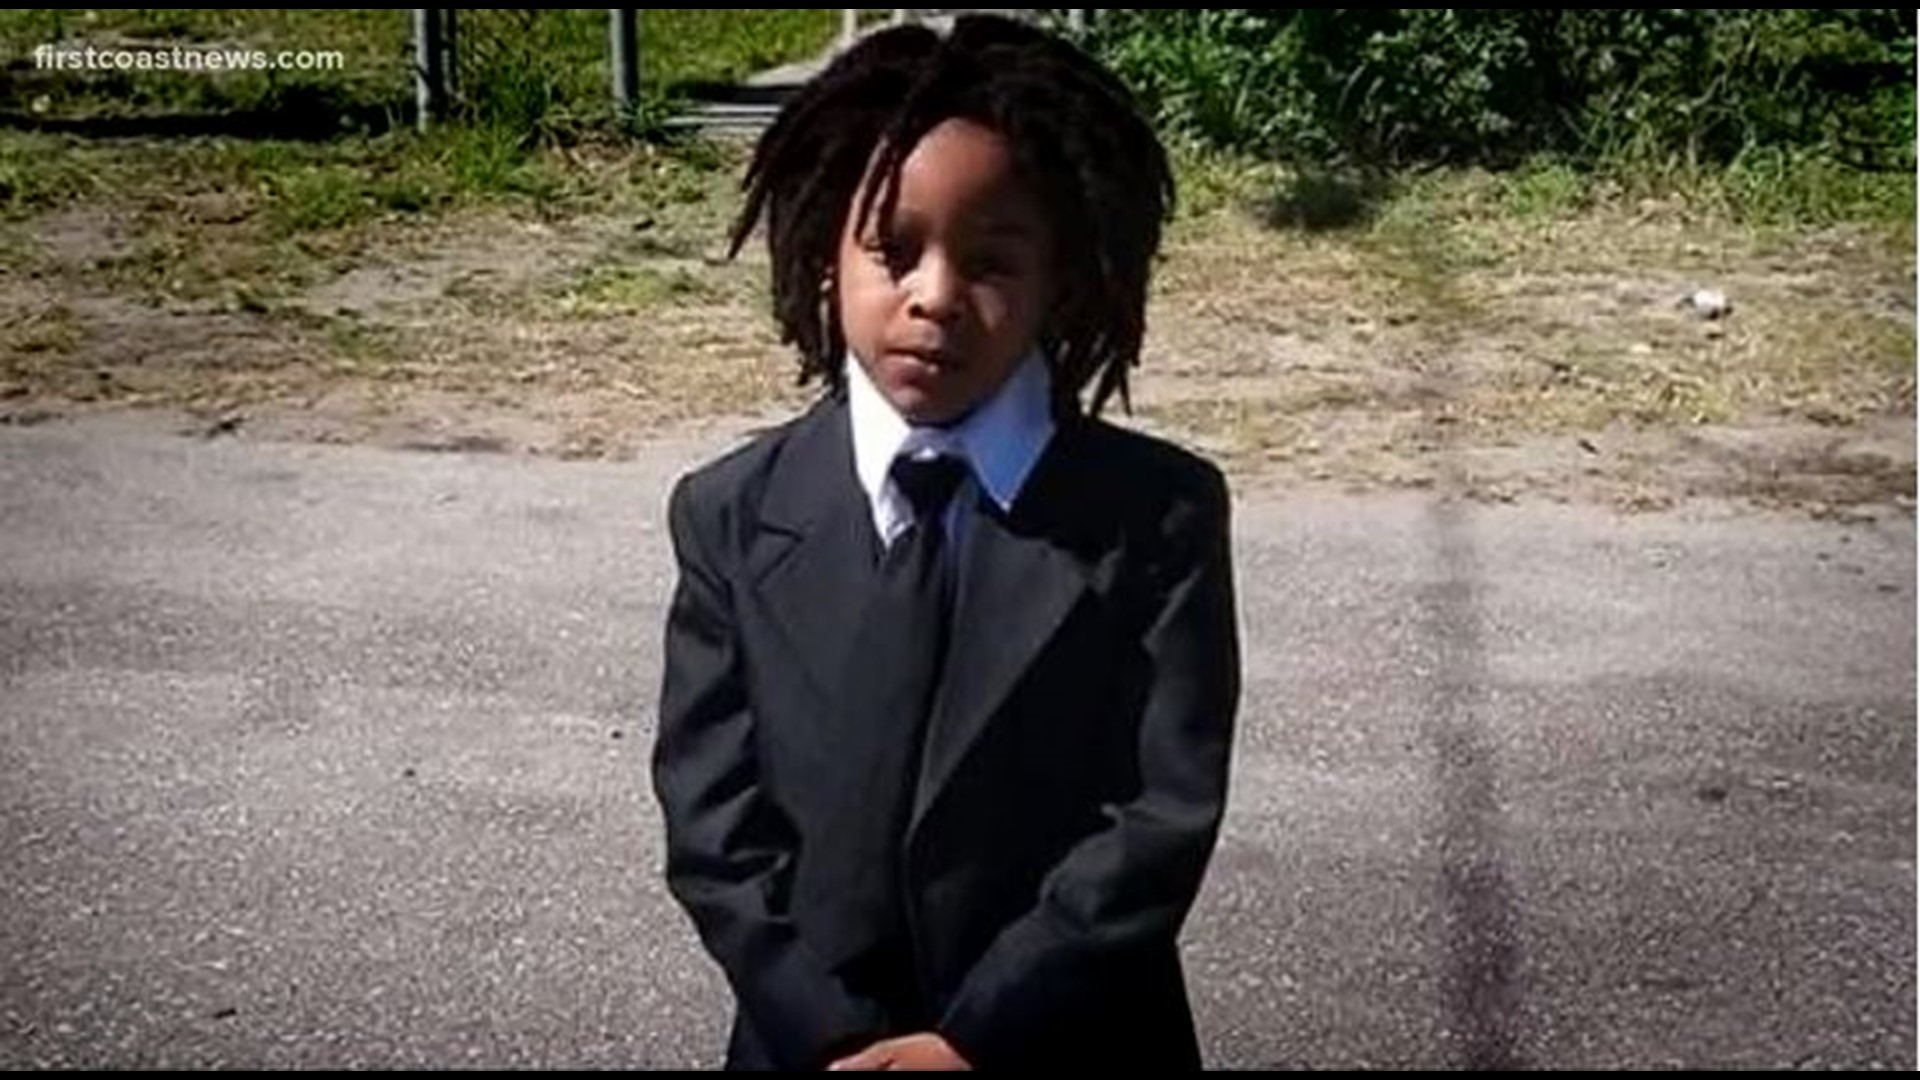 The Jacksonville Sheriff's Office "cleared" the death of a 7-year-old Jacksonville boy as "justifiable," according to JSO's transparency website.